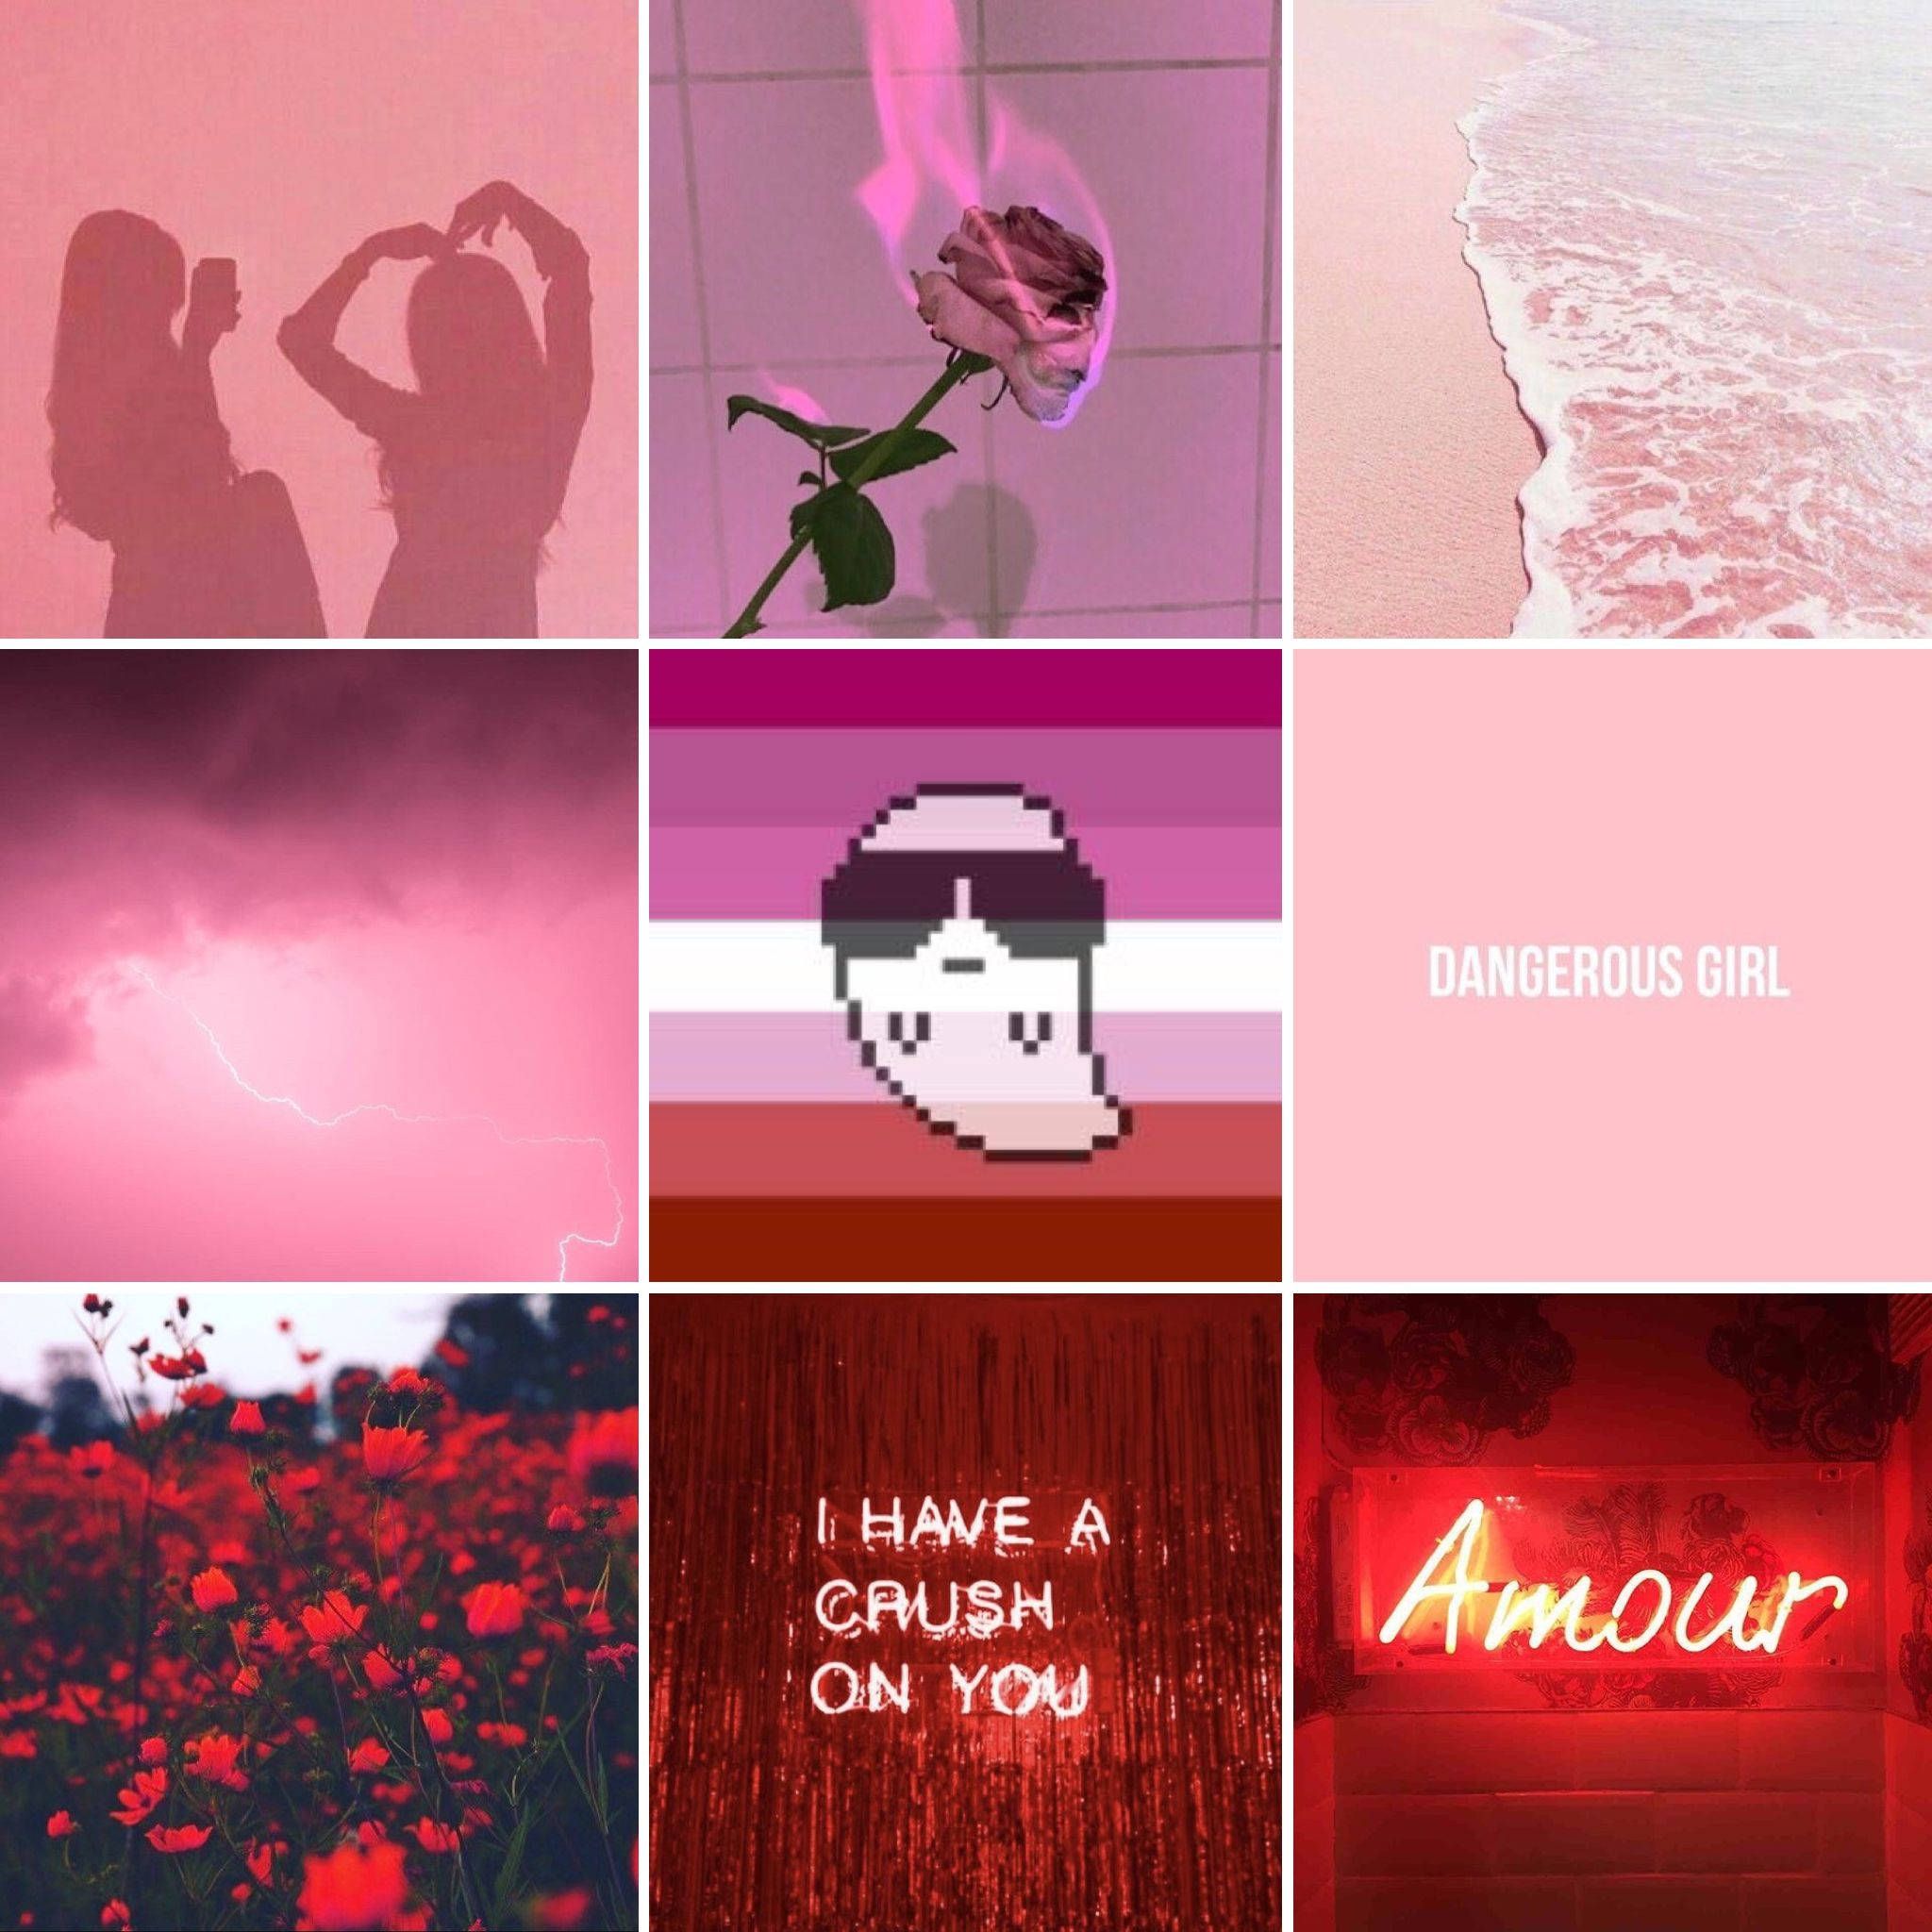 Aesthetic collage of pink and red images including a rose, a neon sign, and a beach. - LGBT, lesbian